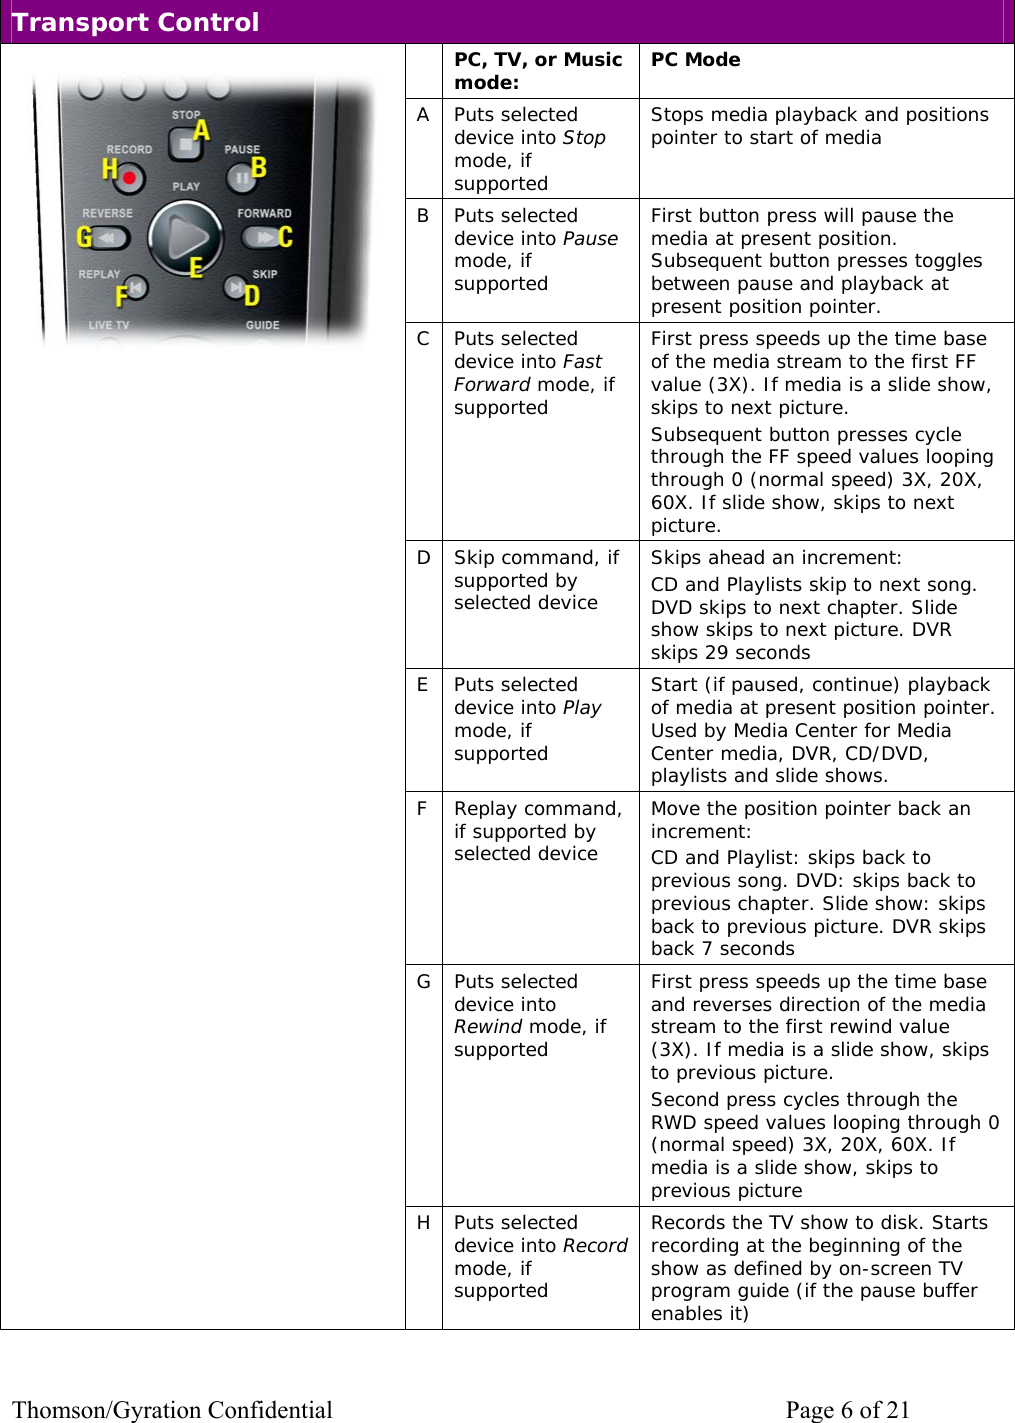 Thomson/Gyration Confidential    Page 6 of 21 Transport Control  PC, TV, or Music mode:  PC Mode A Puts selected device into Stop mode, if supported Stops media playback and positions pointer to start of media B Puts selected device into Pause mode, if supported First button press will pause the media at present position. Subsequent button presses toggles between pause and playback at present position pointer. C Puts selected device into Fast Forward mode, if supported First press speeds up the time base of the media stream to the first FF value (3X). If media is a slide show, skips to next picture. Subsequent button presses cycle through the FF speed values looping through 0 (normal speed) 3X, 20X, 60X. If slide show, skips to next picture. D  Skip command, if supported by selected device Skips ahead an increment: CD and Playlists skip to next song. DVD skips to next chapter. Slide show skips to next picture. DVR skips 29 seconds E Puts selected device into Play mode, if supported Start (if paused, continue) playback of media at present position pointer. Used by Media Center for Media Center media, DVR, CD/DVD, playlists and slide shows.   F Replay command, if supported by selected device Move the position pointer back an increment: CD and Playlist: skips back to previous song. DVD: skips back to previous chapter. Slide show: skips back to previous picture. DVR skips back 7 seconds G Puts selected device into Rewind mode, if supported First press speeds up the time base and reverses direction of the media stream to the first rewind value (3X). If media is a slide show, skips to previous picture. Second press cycles through the RWD speed values looping through 0 (normal speed) 3X, 20X, 60X. If media is a slide show, skips to previous picture  H Puts selected device into Record mode, if supported Records the TV show to disk. Starts recording at the beginning of the show as defined by on-screen TV program guide (if the pause buffer enables it) 